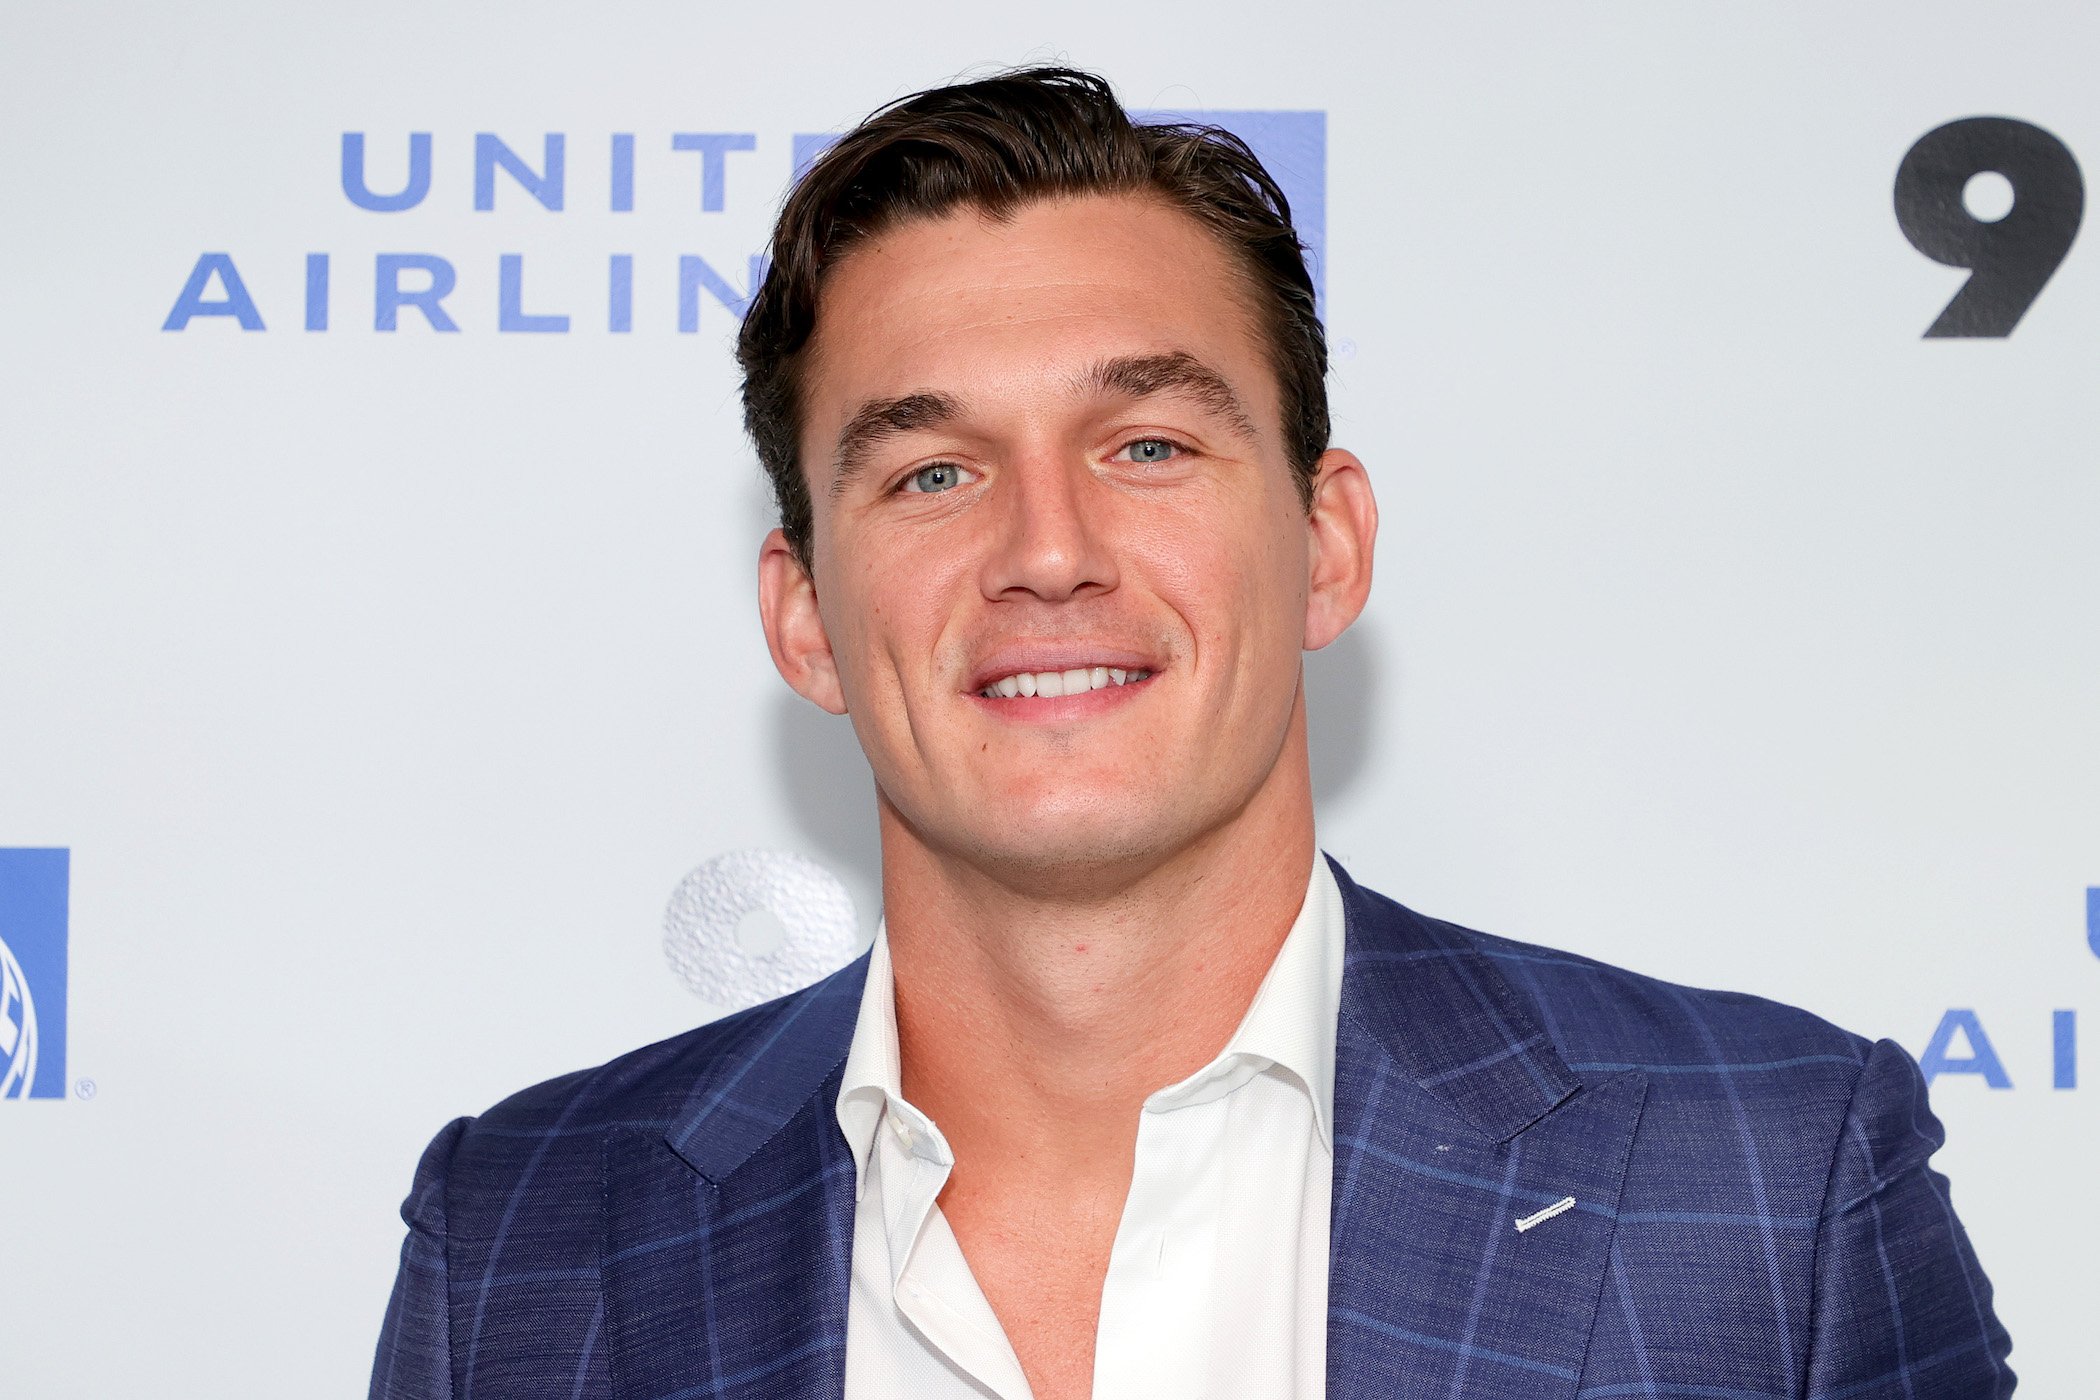 Tyler Cameron from 'The Bachelorette' smiling at an event